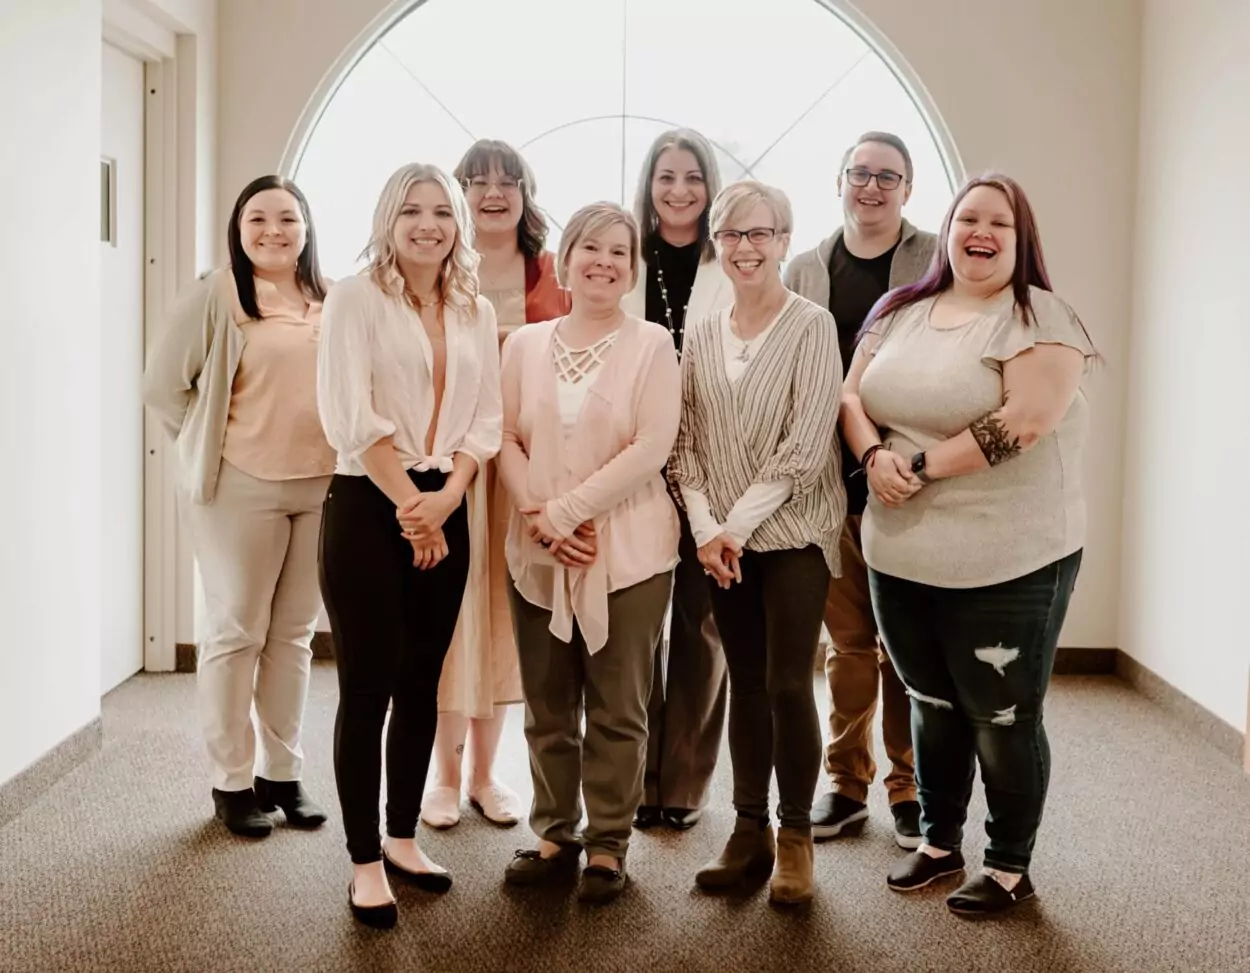 Group shot of the staff of Intera standing in front of a bay window. Back row from left to right: Alexis, Amanda, Mary, and Jarrod. Front row from left to right: Rosemary, Angela, Sandy, and Taylour.